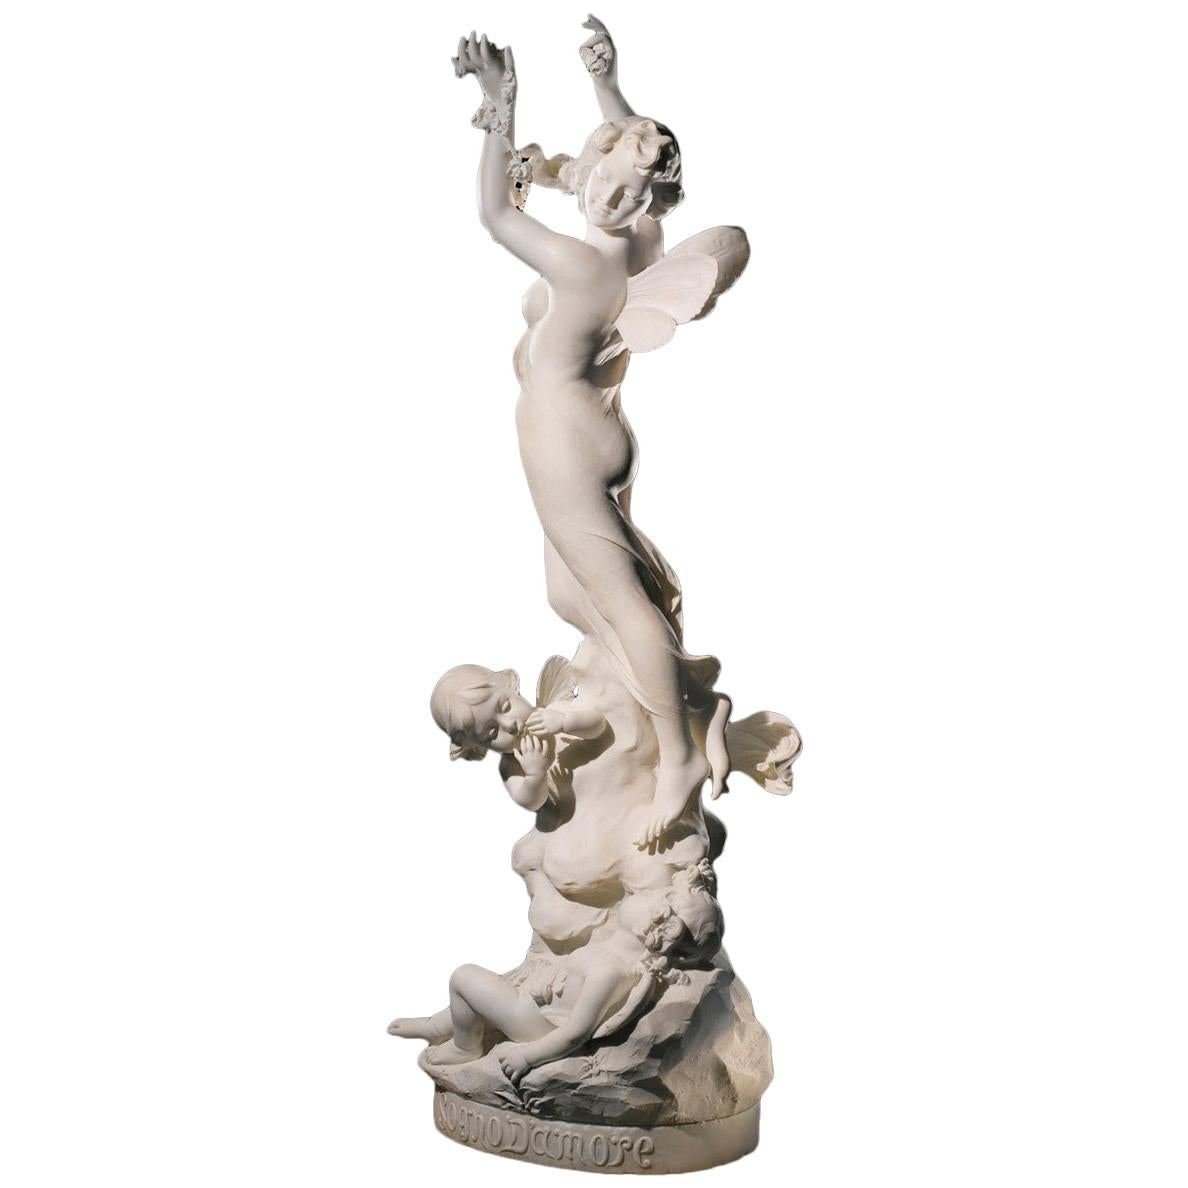 Italian White Marble Figure of a Nude Beauty with Putti